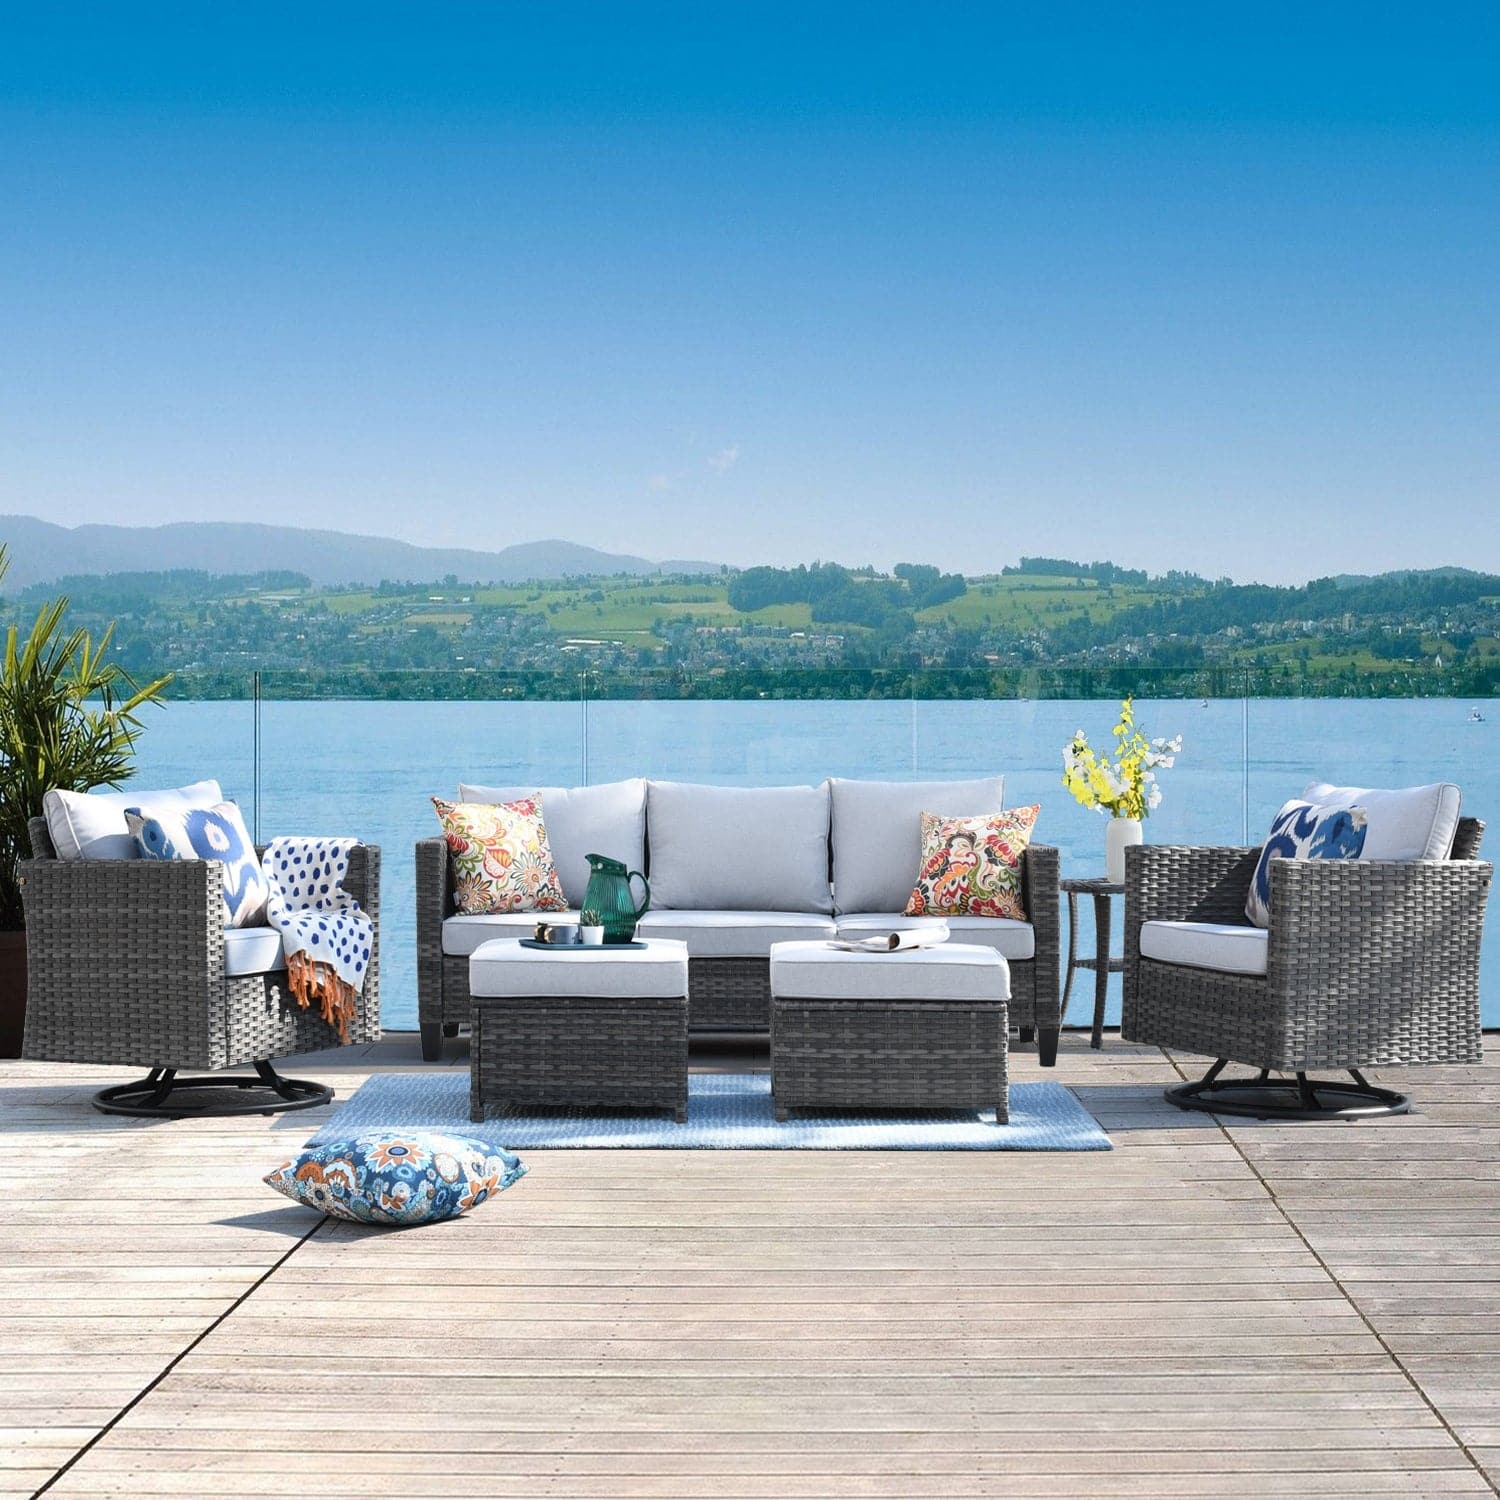 Ovios Patio Furniture Set 6-Piece with Swivel Rocking Chairs and Table